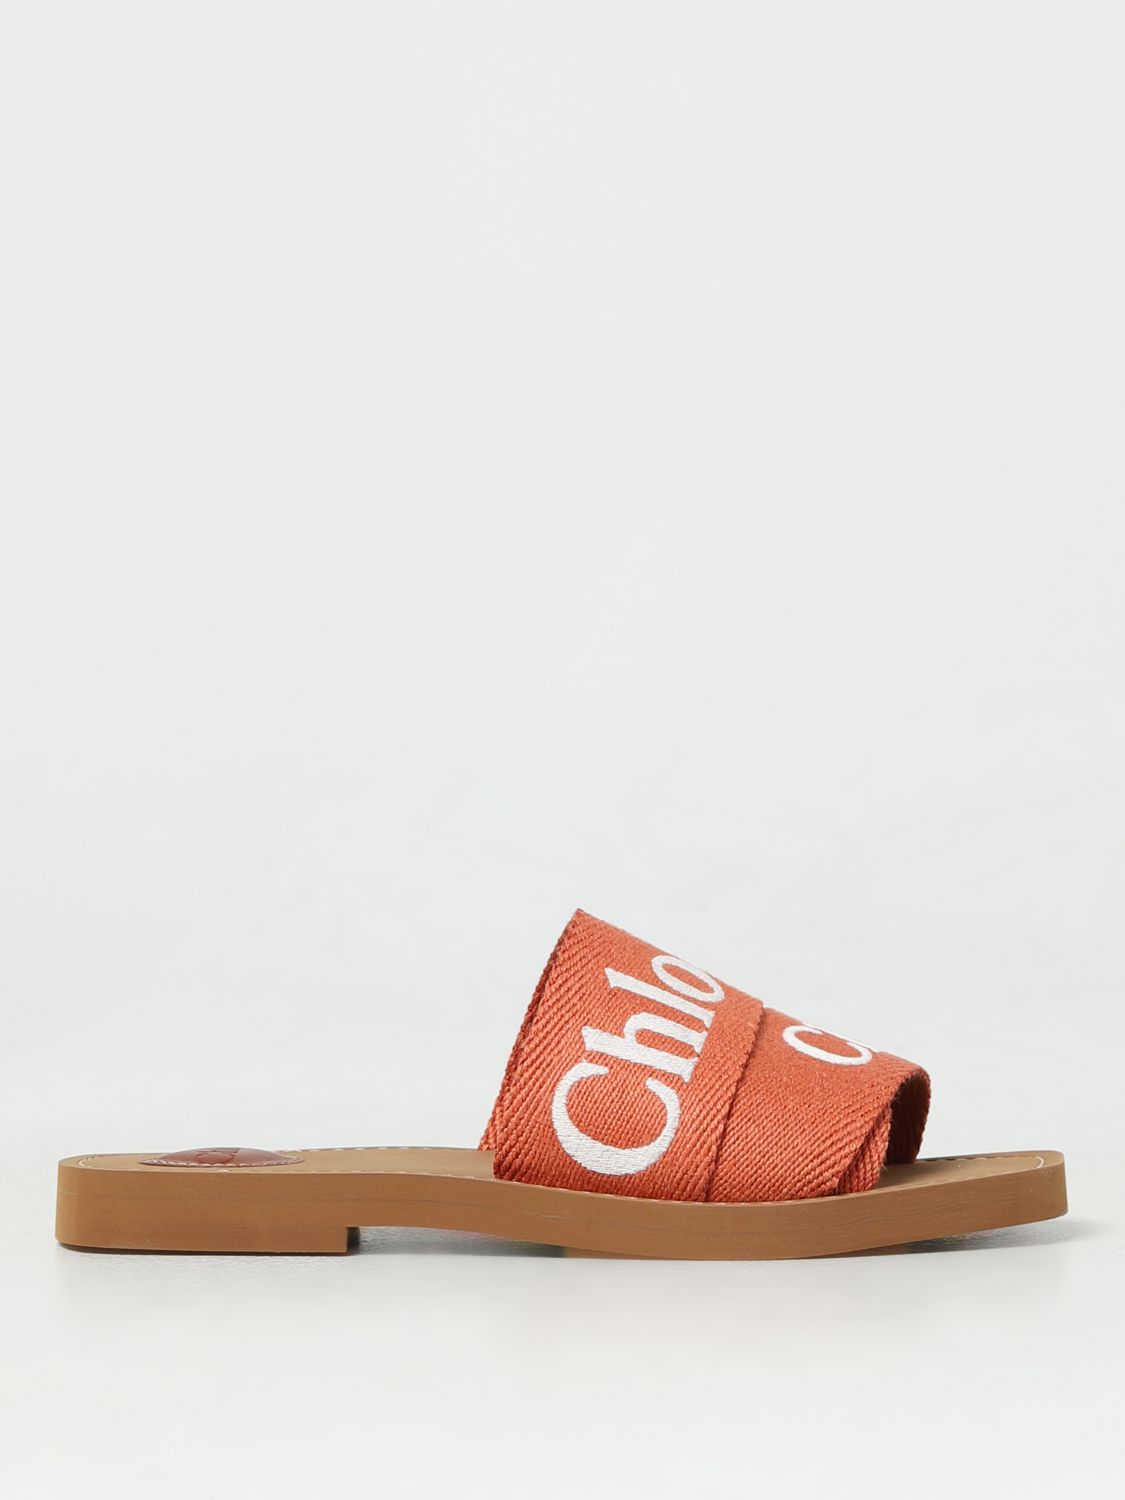 CHLOÉ WOODY CANVAS SLIDES WITH EMBROIDERED LOGO,F10207004